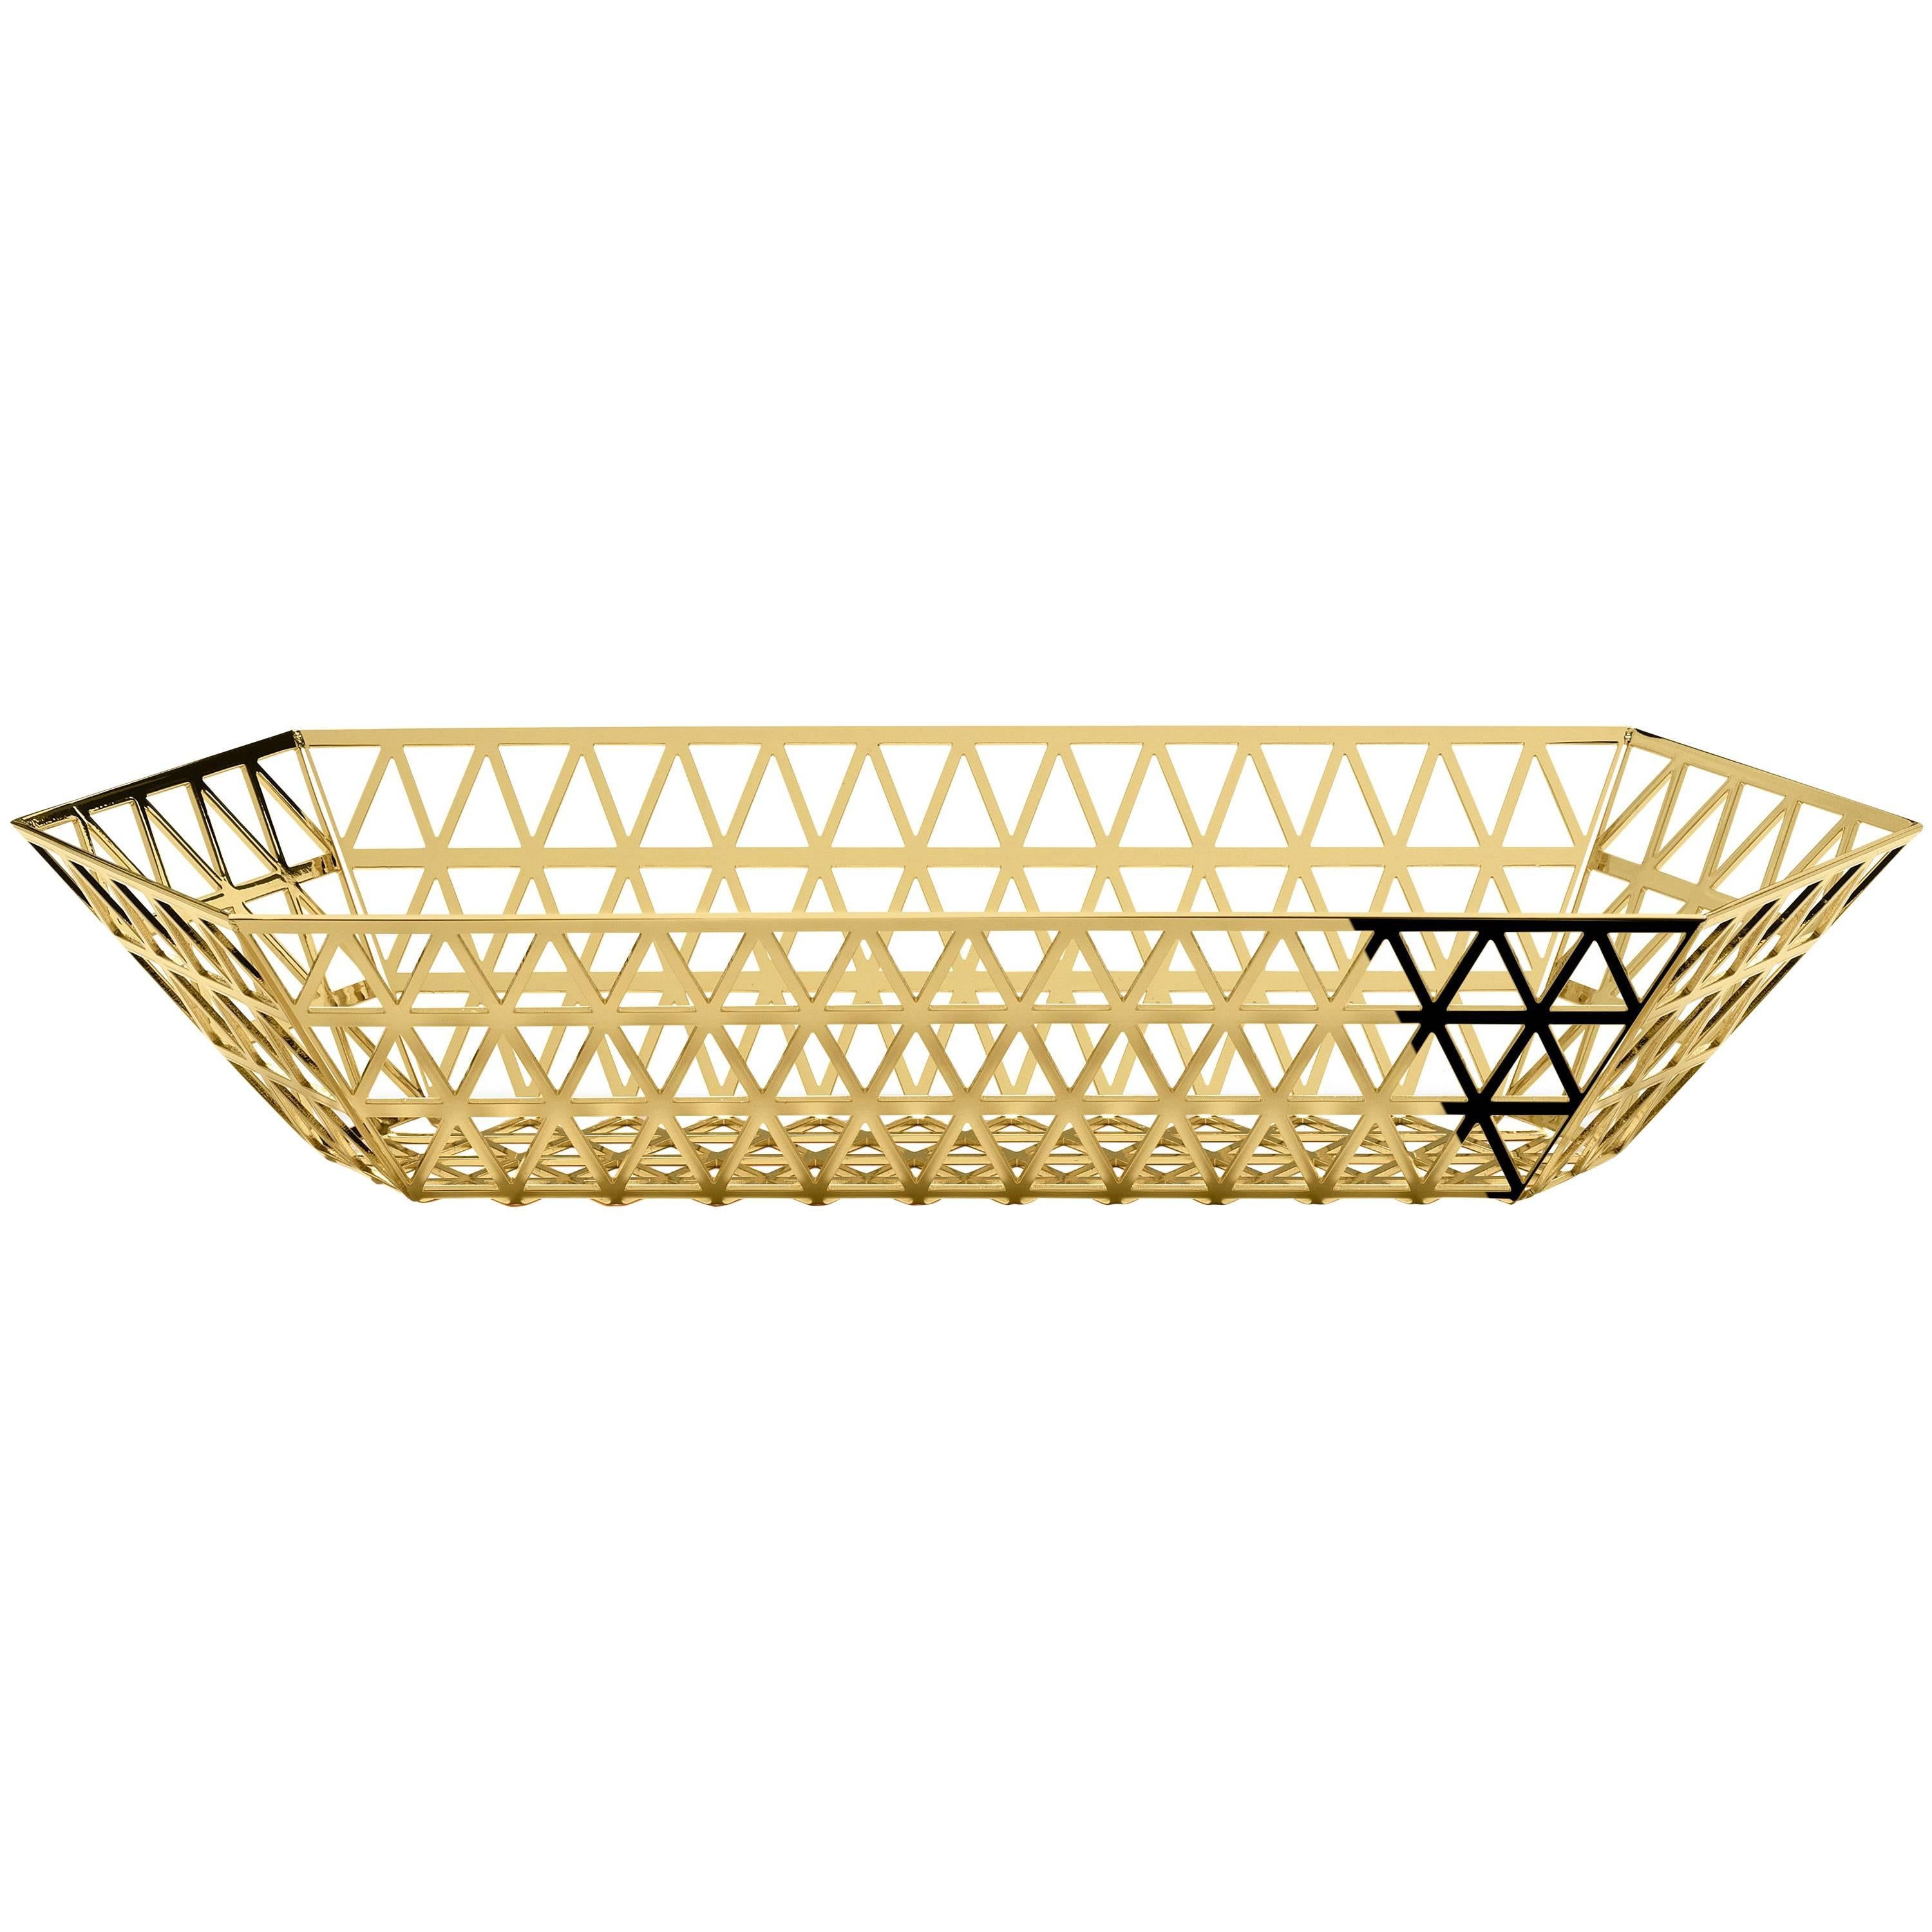 Ghidini 1961 Tip Top Limousine Tray in Polished Gold Finish